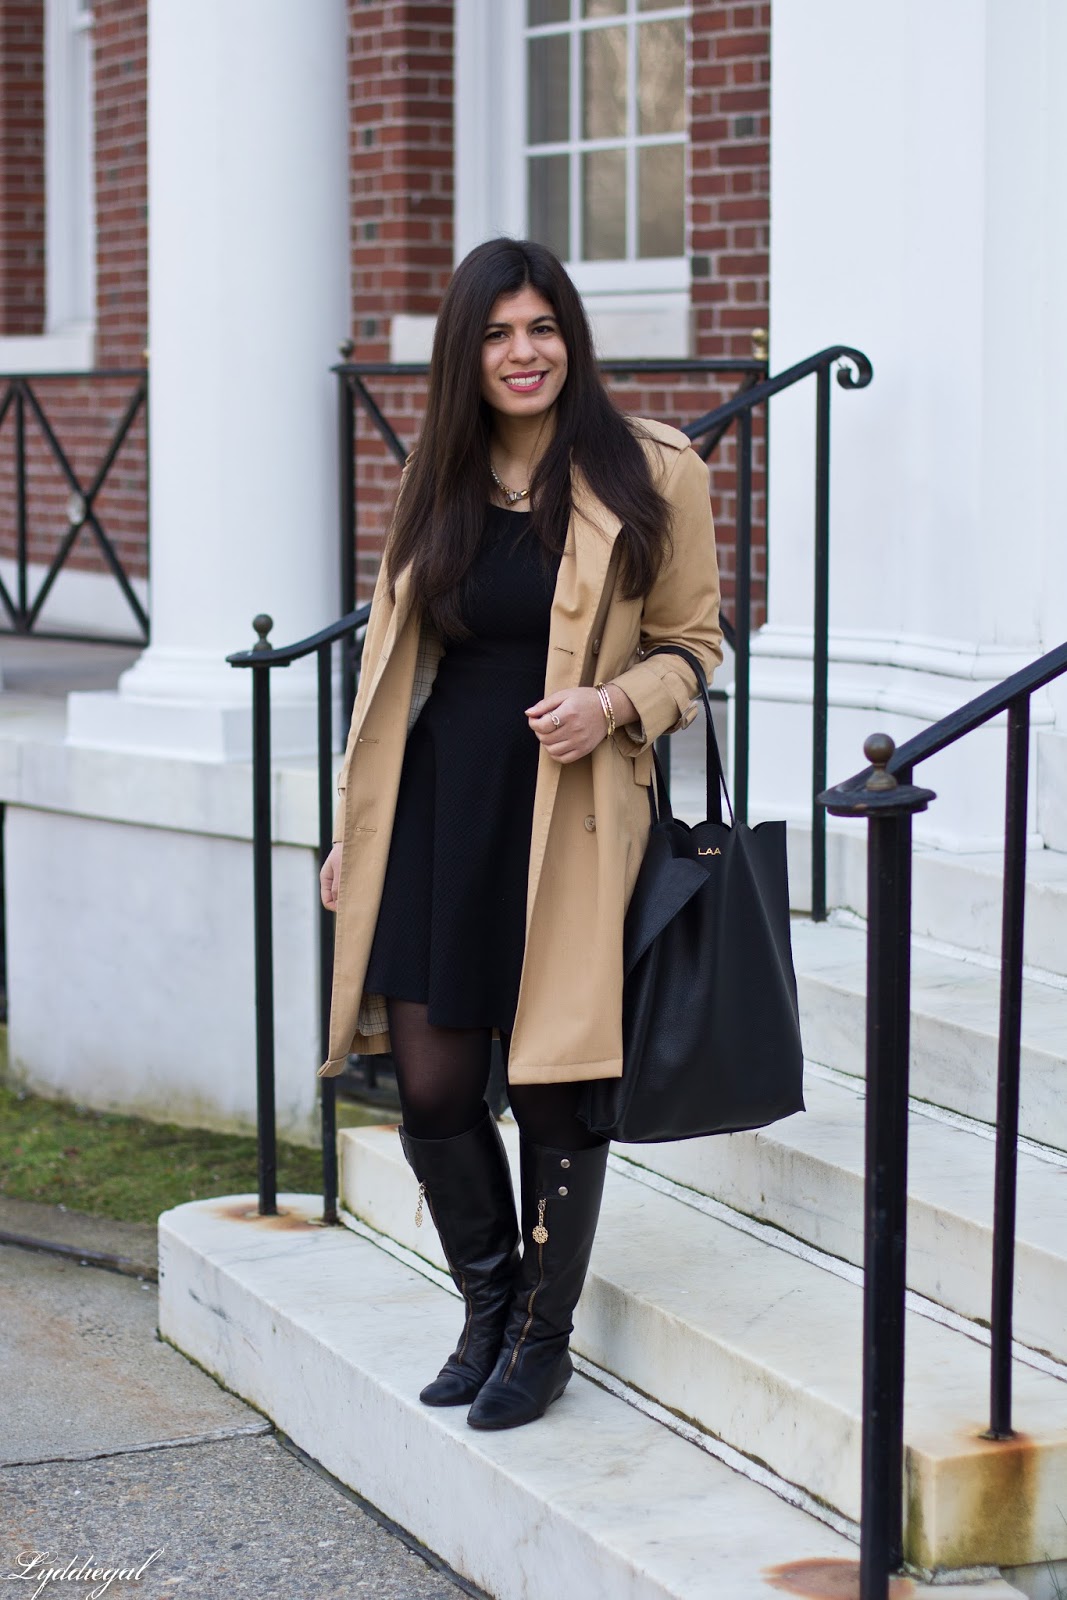 Velvet Bodysuit - Chic on the Cheap  Connecticut based style blogger on a  budget, by Lydia Abate